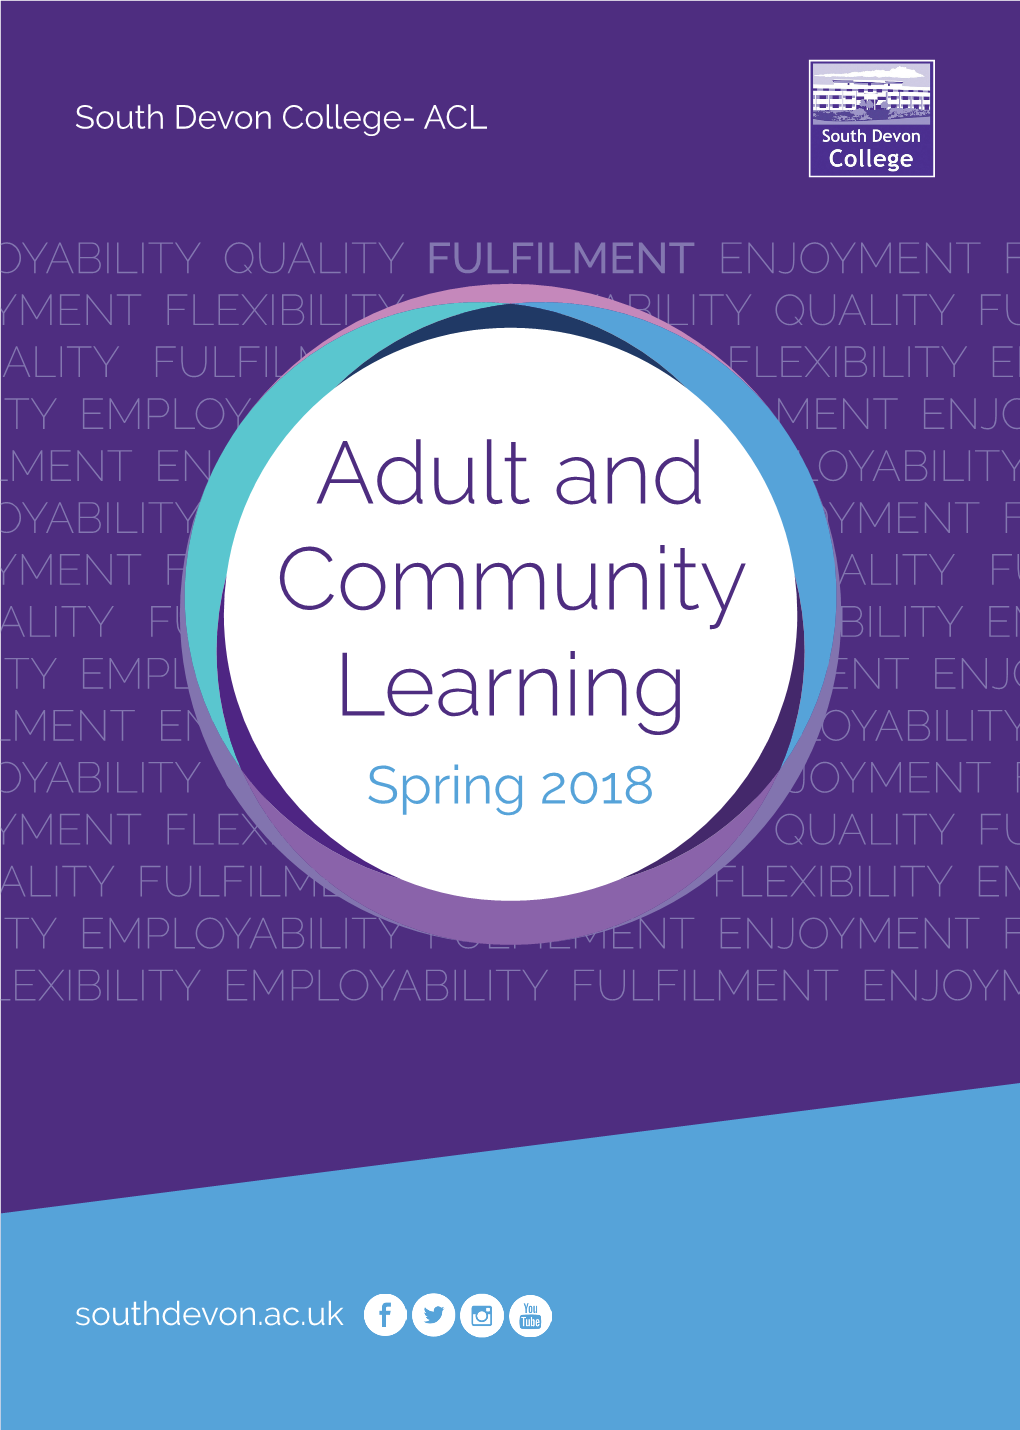 Adult and Community Learning